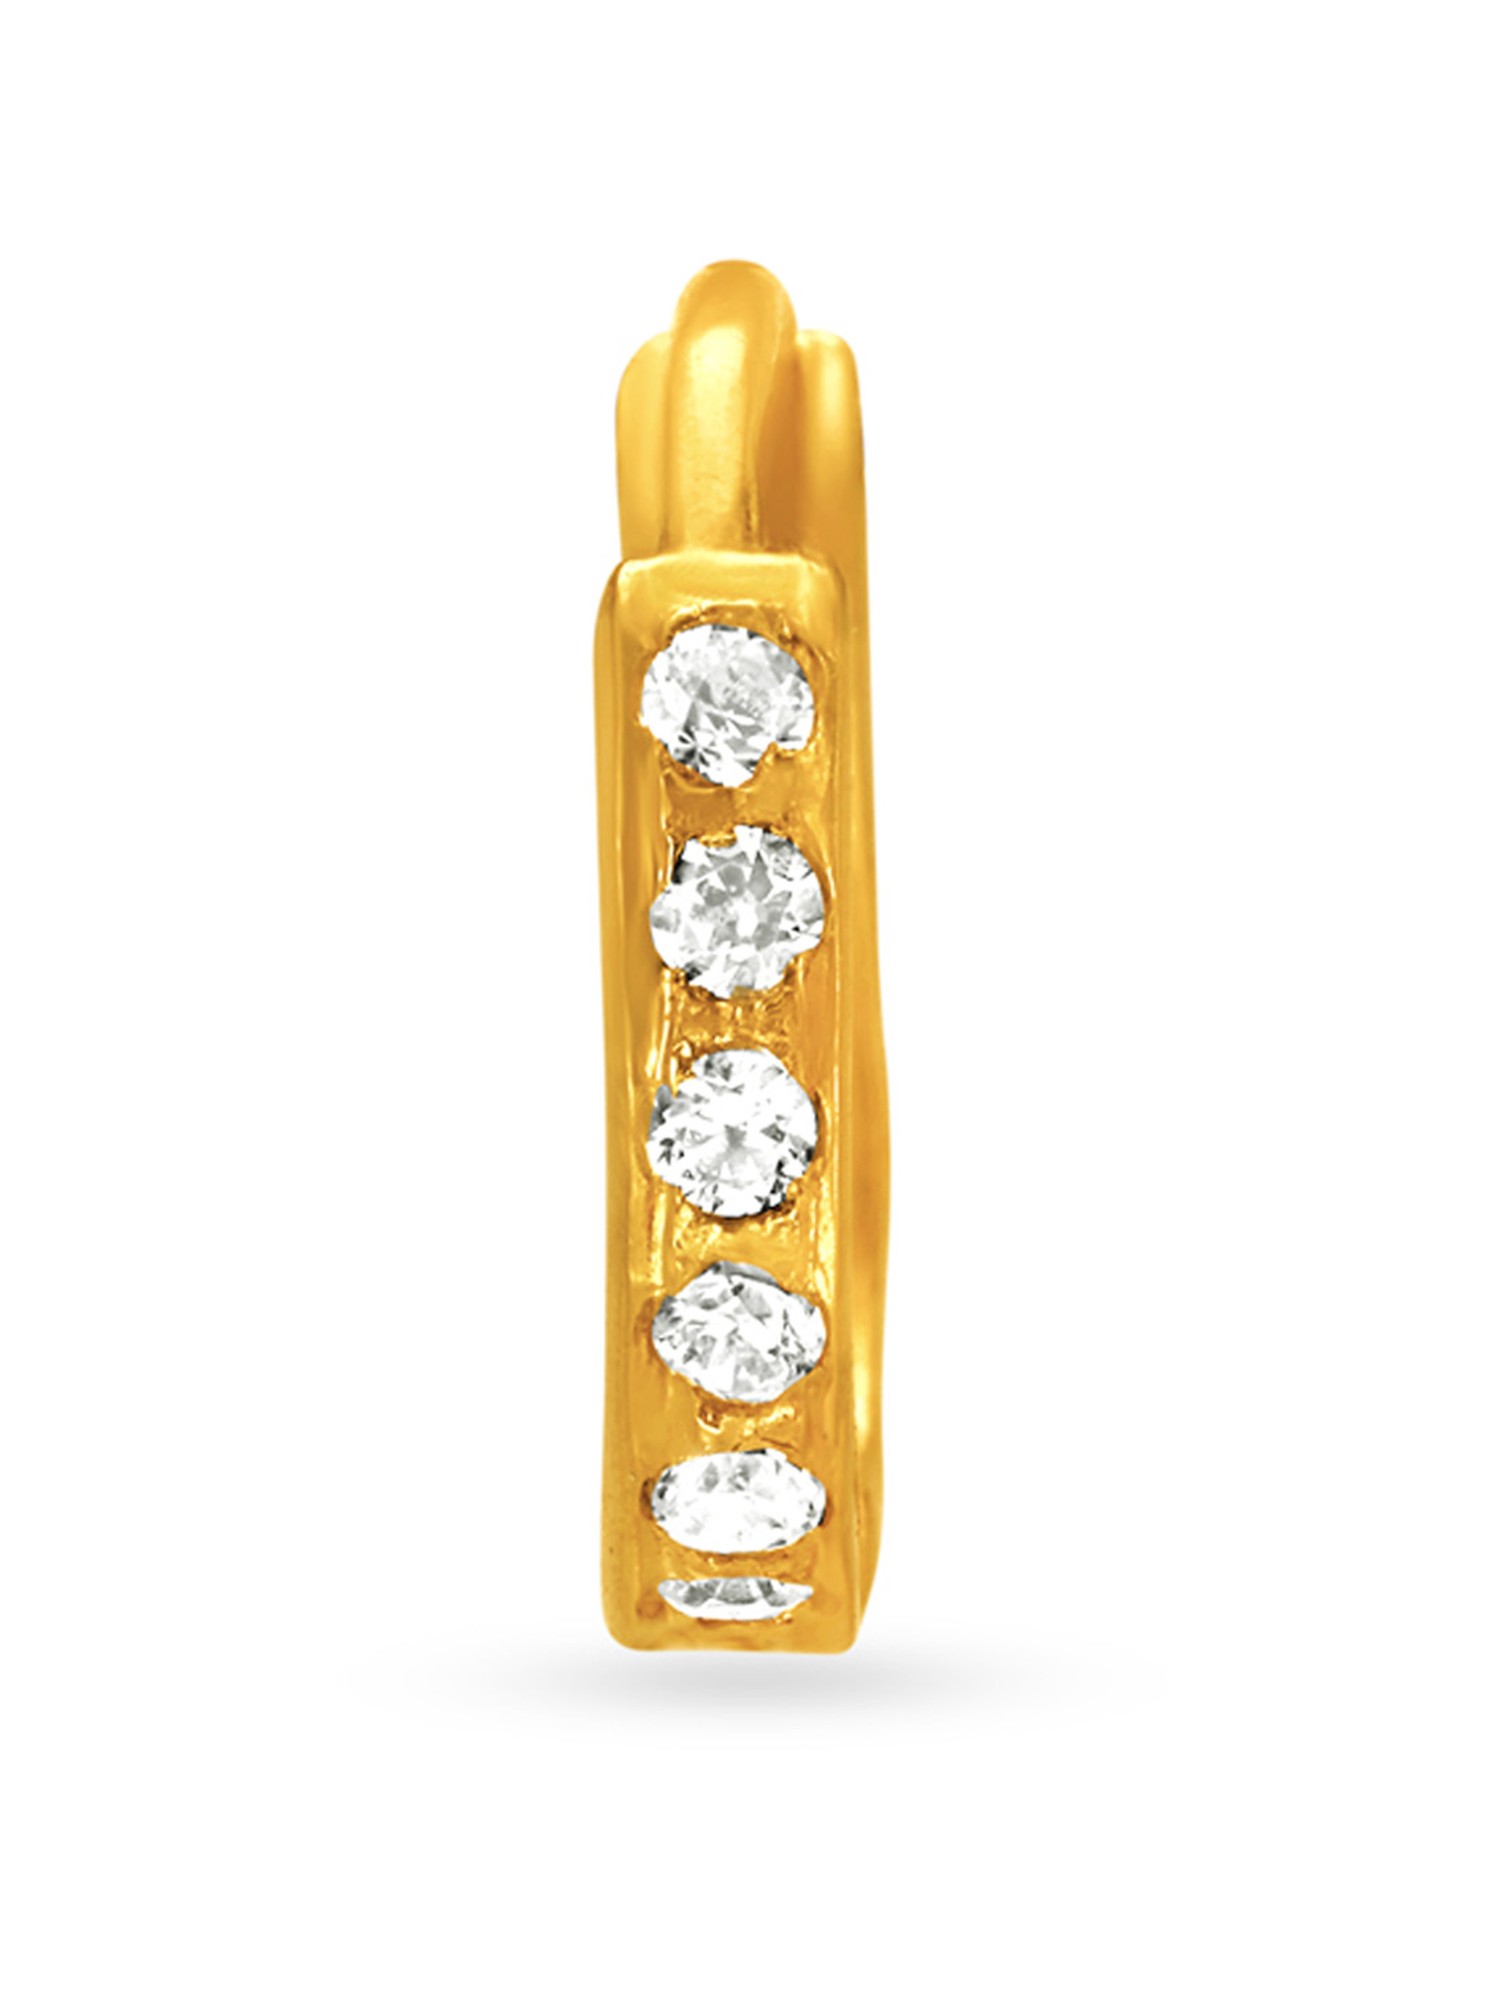 Buy Diamond Nose Pin in India | Chungath Jewellery Online- Rs. 9,330.00